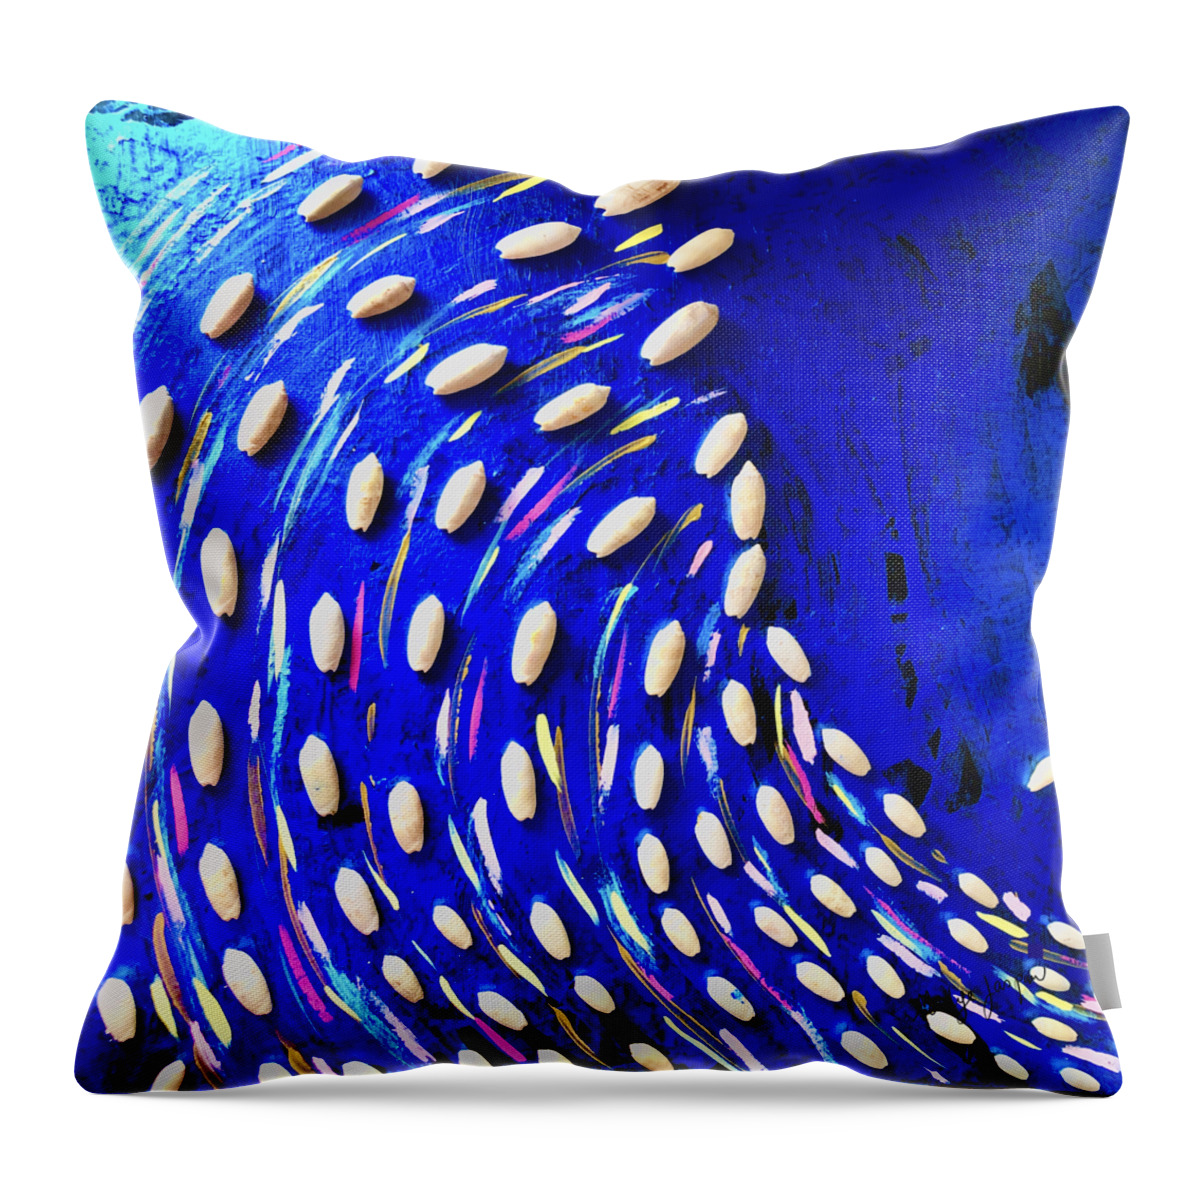 Coquillage Throw Pillow featuring the painting Ocean de Coquillages by Medge Jaspan